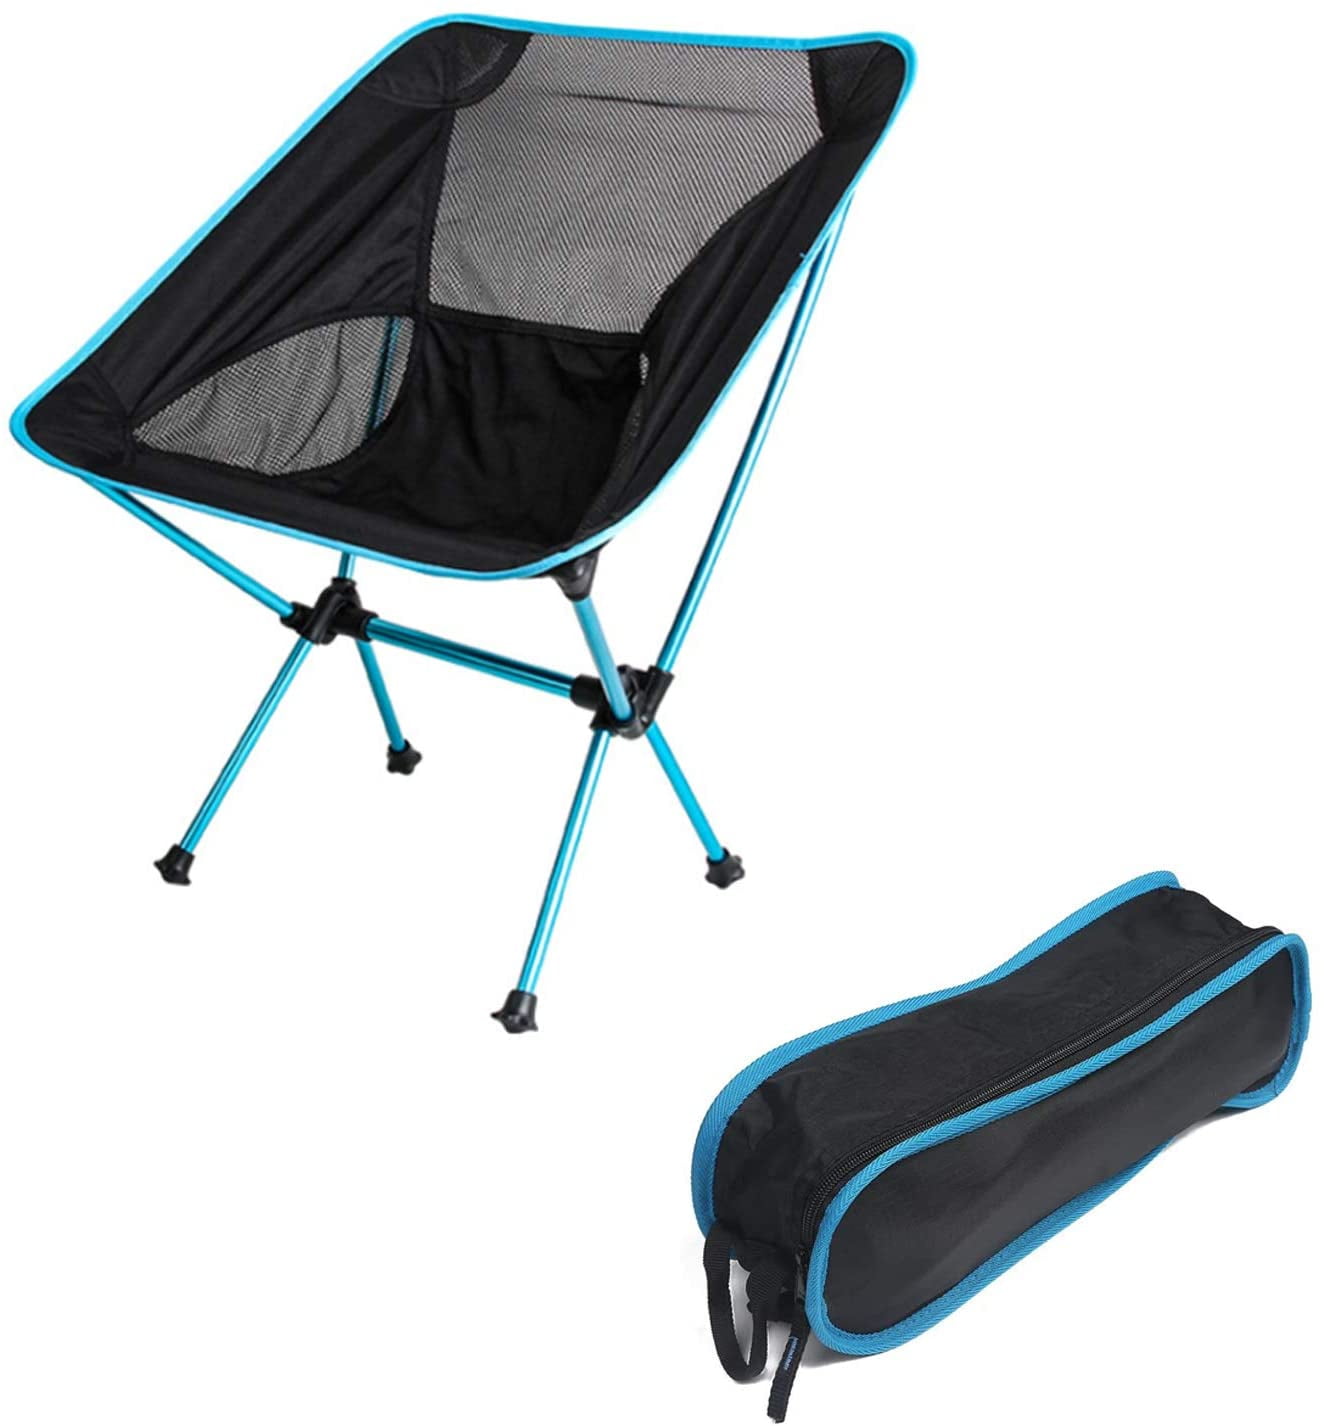 BBQ Portable Camping Chair Fishing Heavy Duty 330lbs Capacity with Carry Bag Hiking Picnic Festival Lightweight Compact Folding Backpacking Chair for Outdoor 